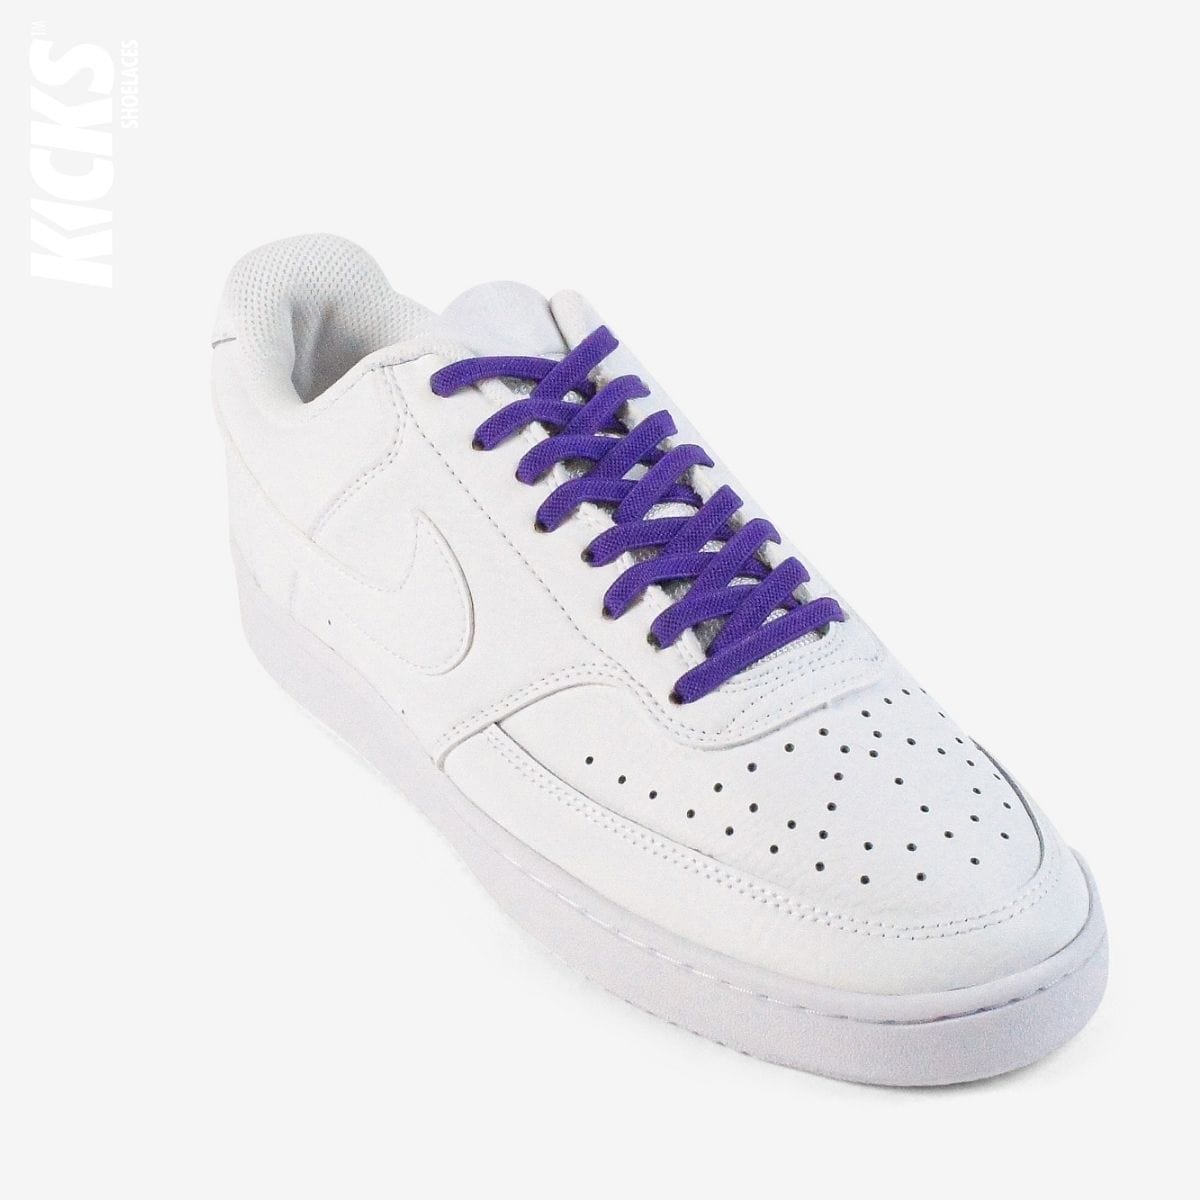 no-tie-shoelaces-with-purple-laces-on-nike-white-sneakers-by-kicks-shoelaces